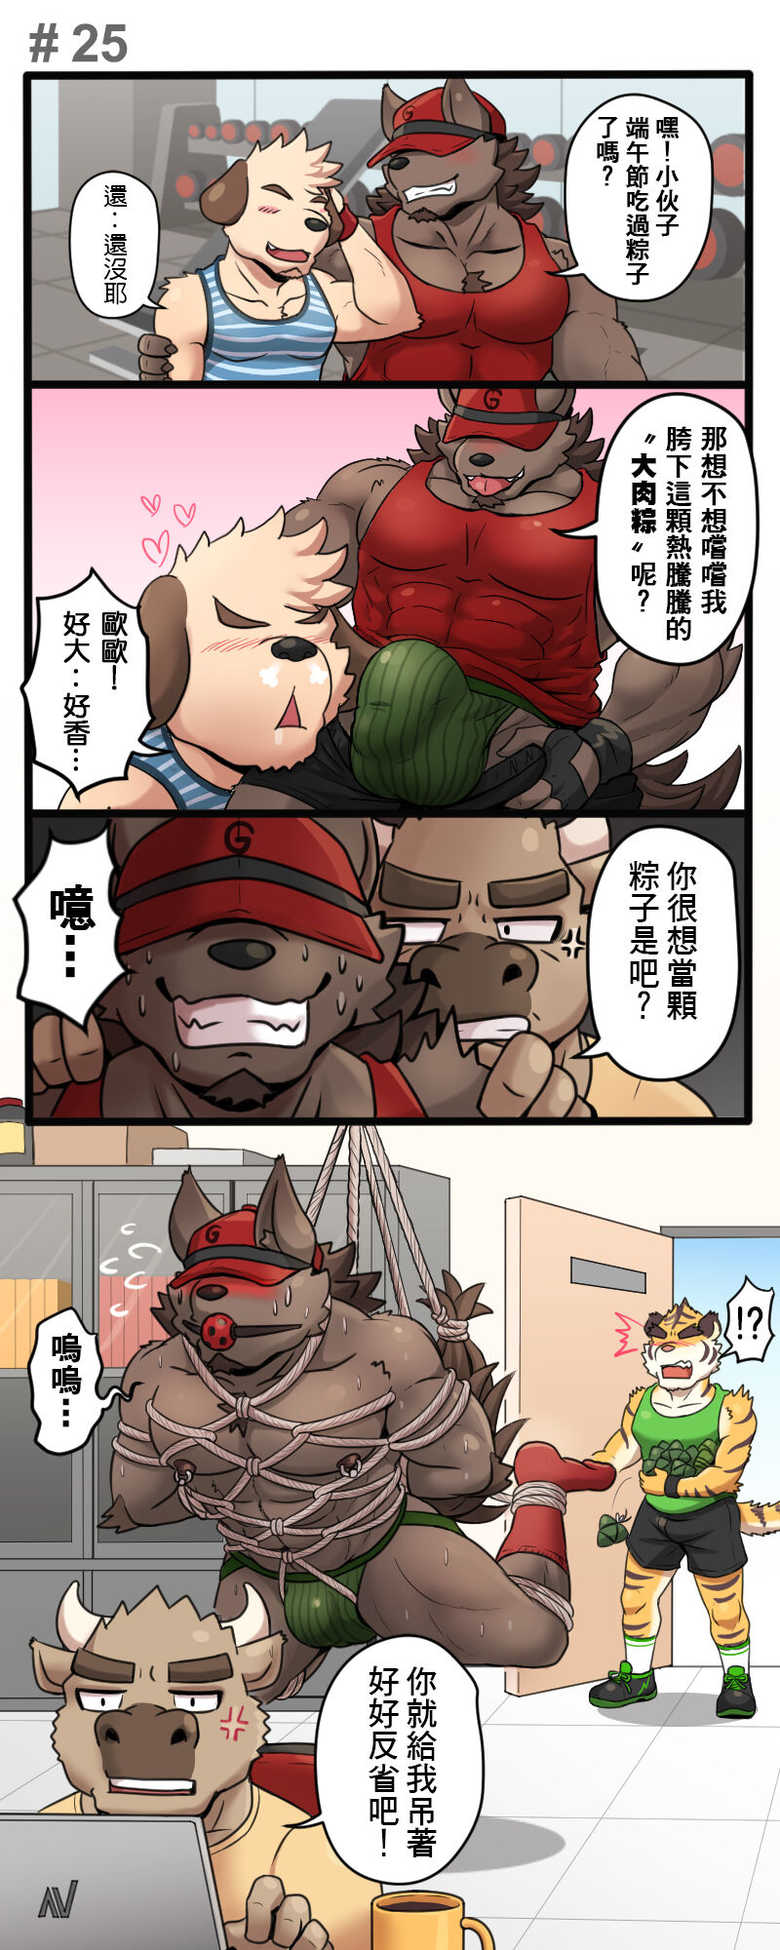 [Ripple Moon (漣漪月影)] Gym Pals - Pal and his gym pals' gaily daily life [Chinese] (ongoing) - Page 31